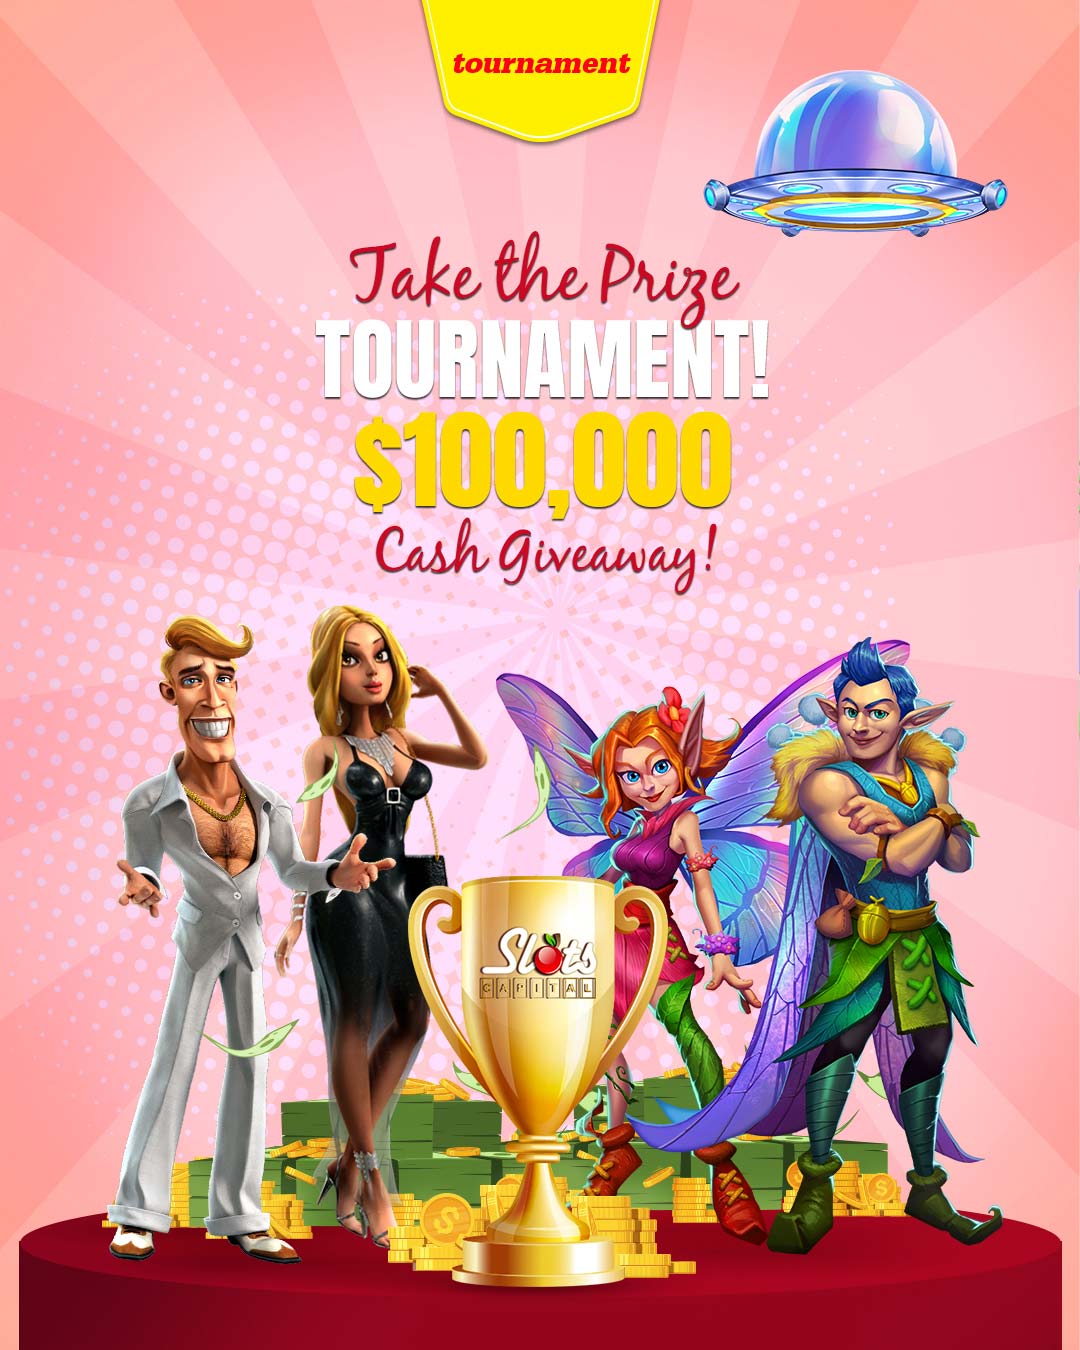 Take the prize tournament! $100,000 Cash Givaway with many slot characters